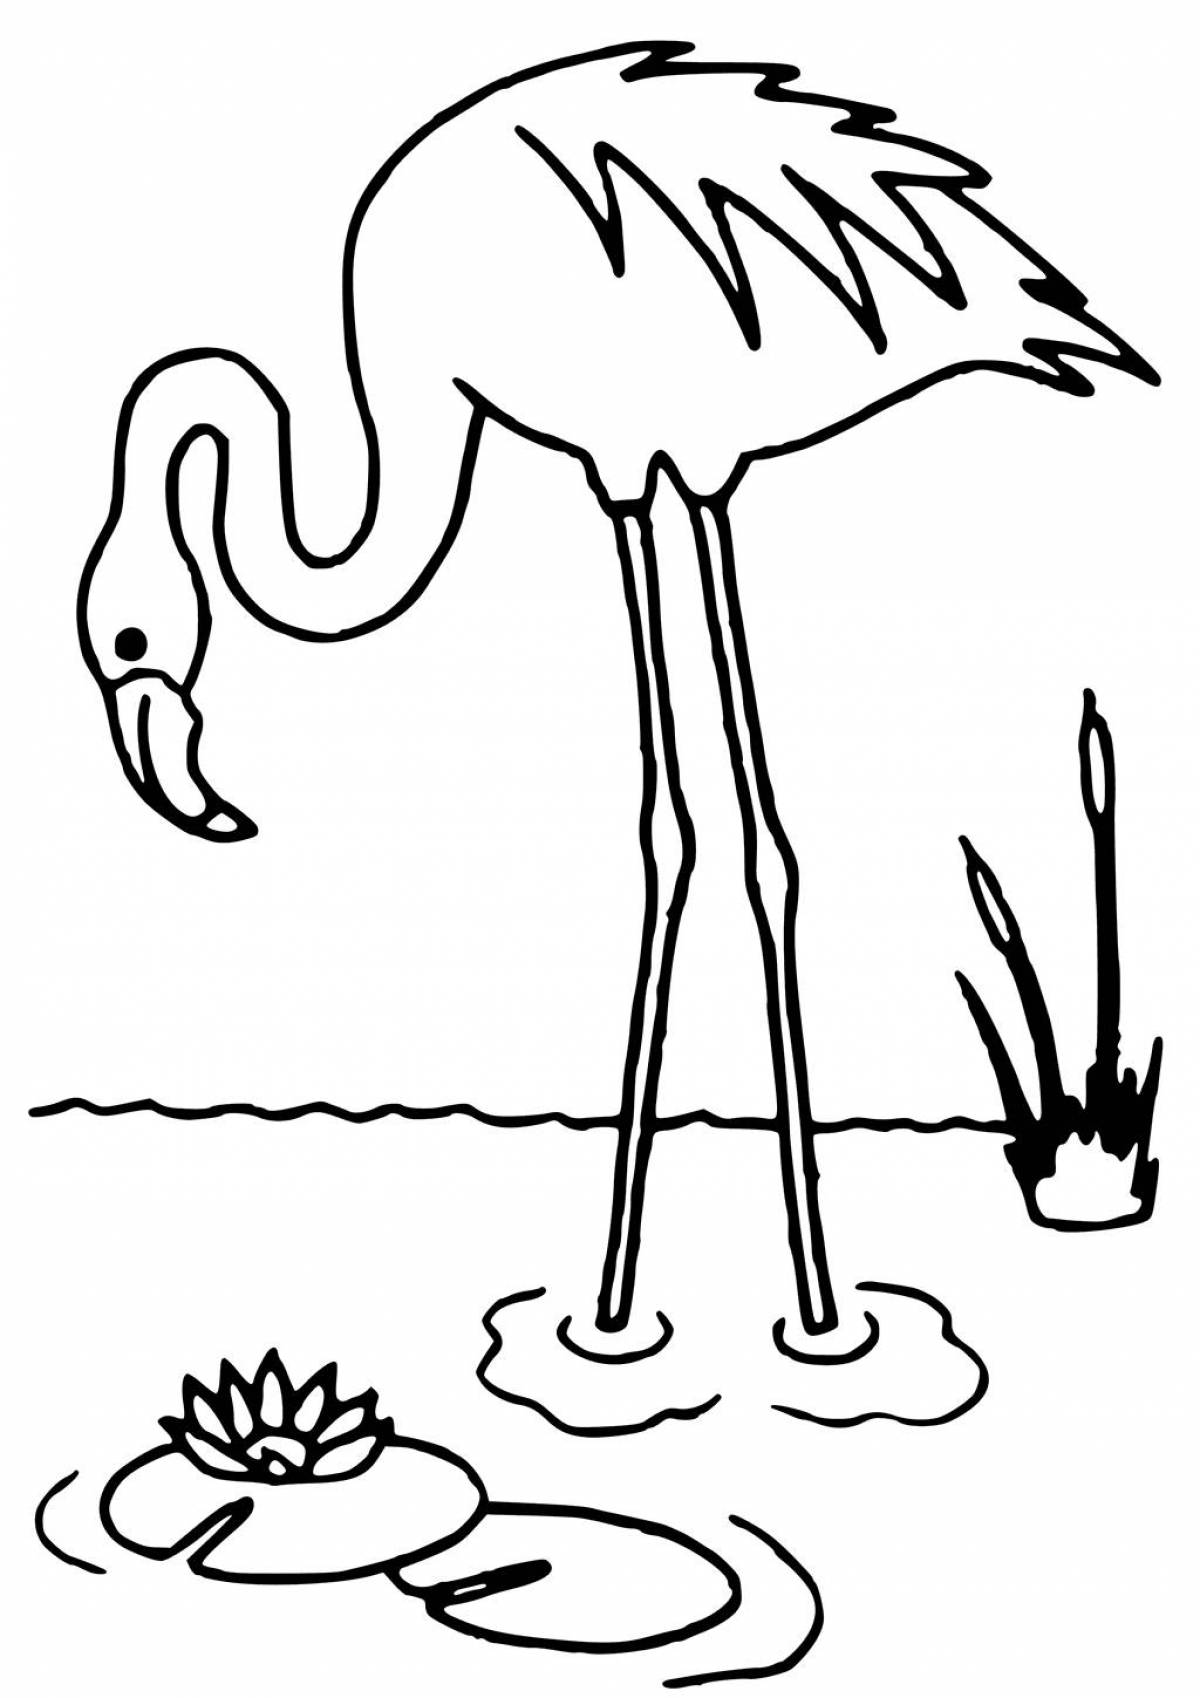 Fun flamingo coloring pages for kids